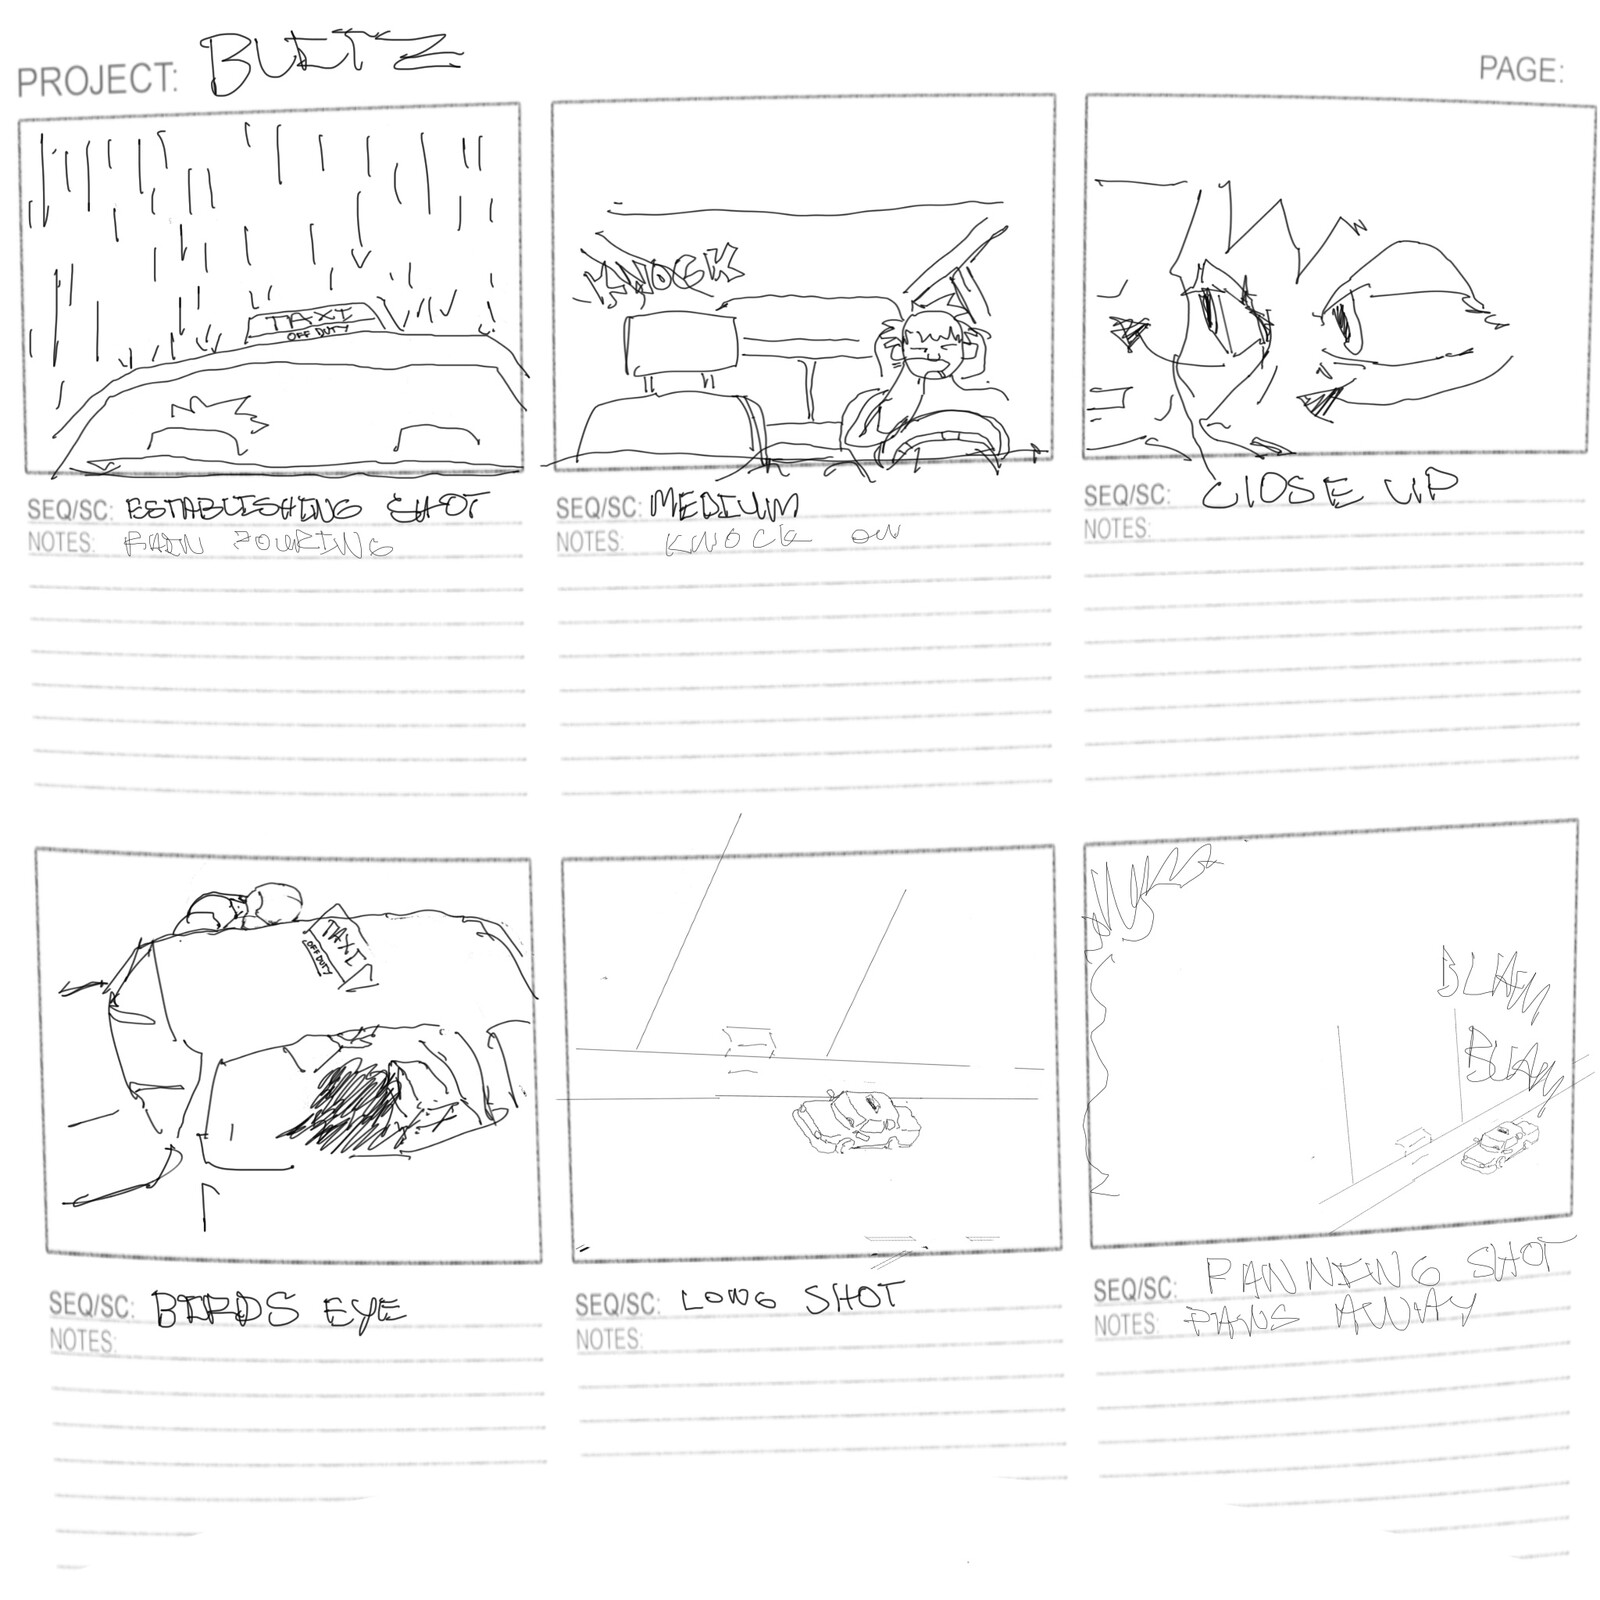 First ideas for the storyboard I didn’t use this one I felt it was to grim